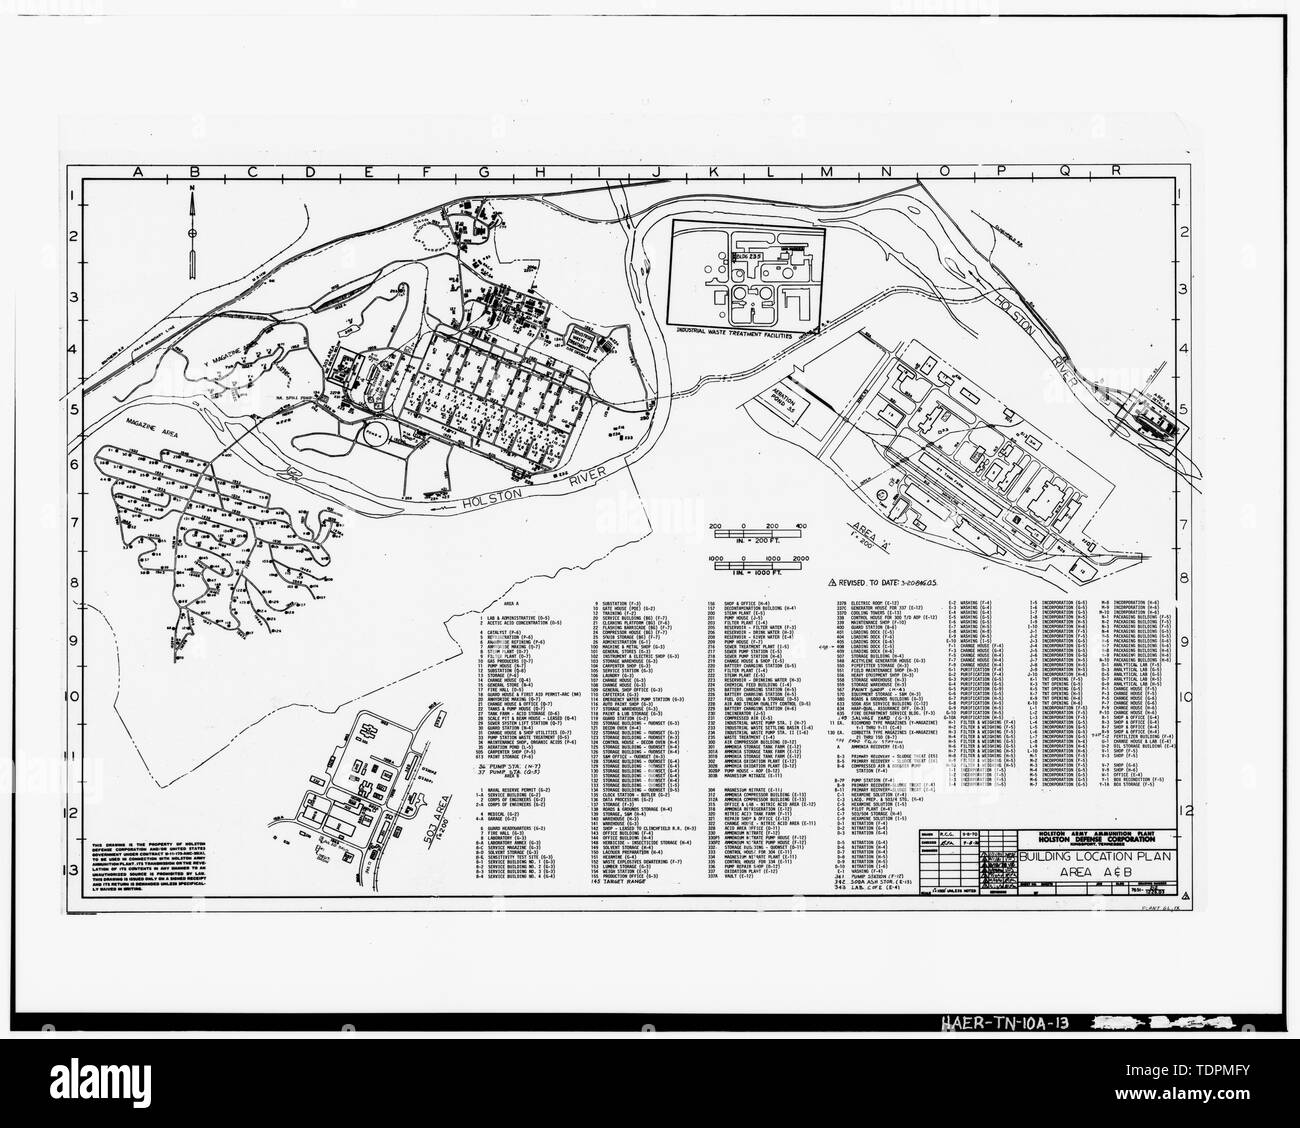 Photograph of a line drawing. 'BUILDING LOCATION PLAN, AREAS A and B.' Holston Army Ammunition Plant, Holston Defense Corporation. September 8, 1970. Delineator- R. C. G. Drawing - 7651-212-1226.03. - Holston Army Ammunition Plant, Producer Gas Plant, Kingsport, Sullivan County, TN; U.S. Army; Tennessee Eastman Corporation; U.S. Army Corps of Engineers; Fraser-Brace Co., Inc.; Charles T. Main, Inc.; Semet Solvay Engineering Corporation; Mack, Robert C, historian; Dennett Muessig, Ryan and Associates, Ltd., photographer; Tompkins, Sally Kress, program manager; Lange, Robie S, project manager; B Stock Photo